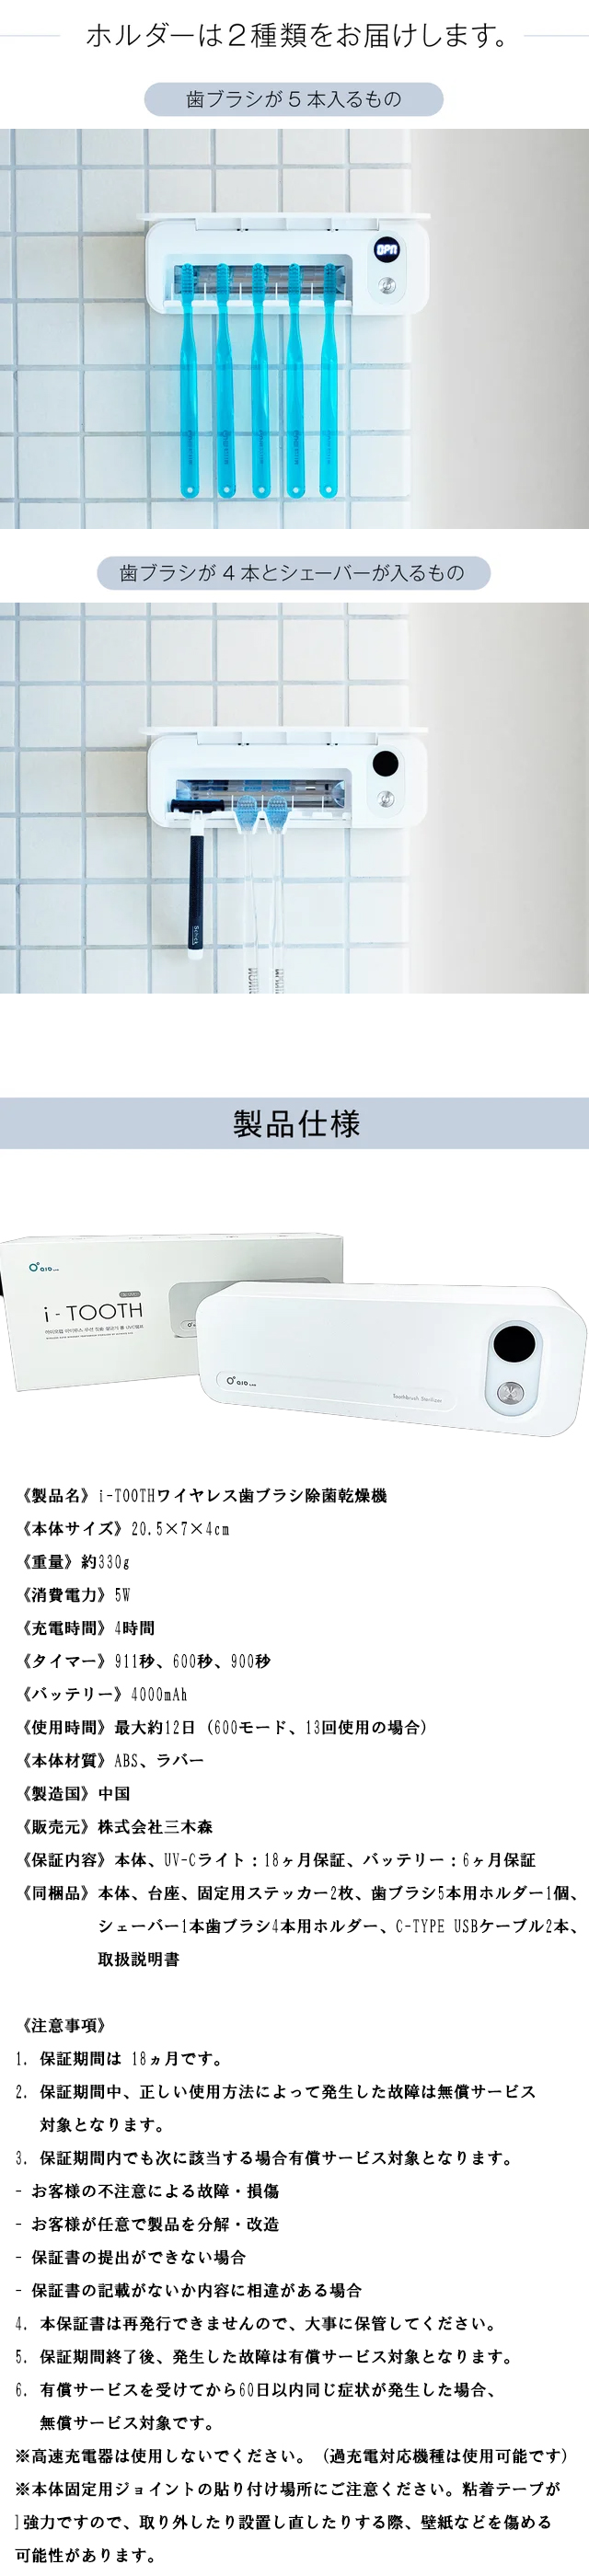 i-tooth